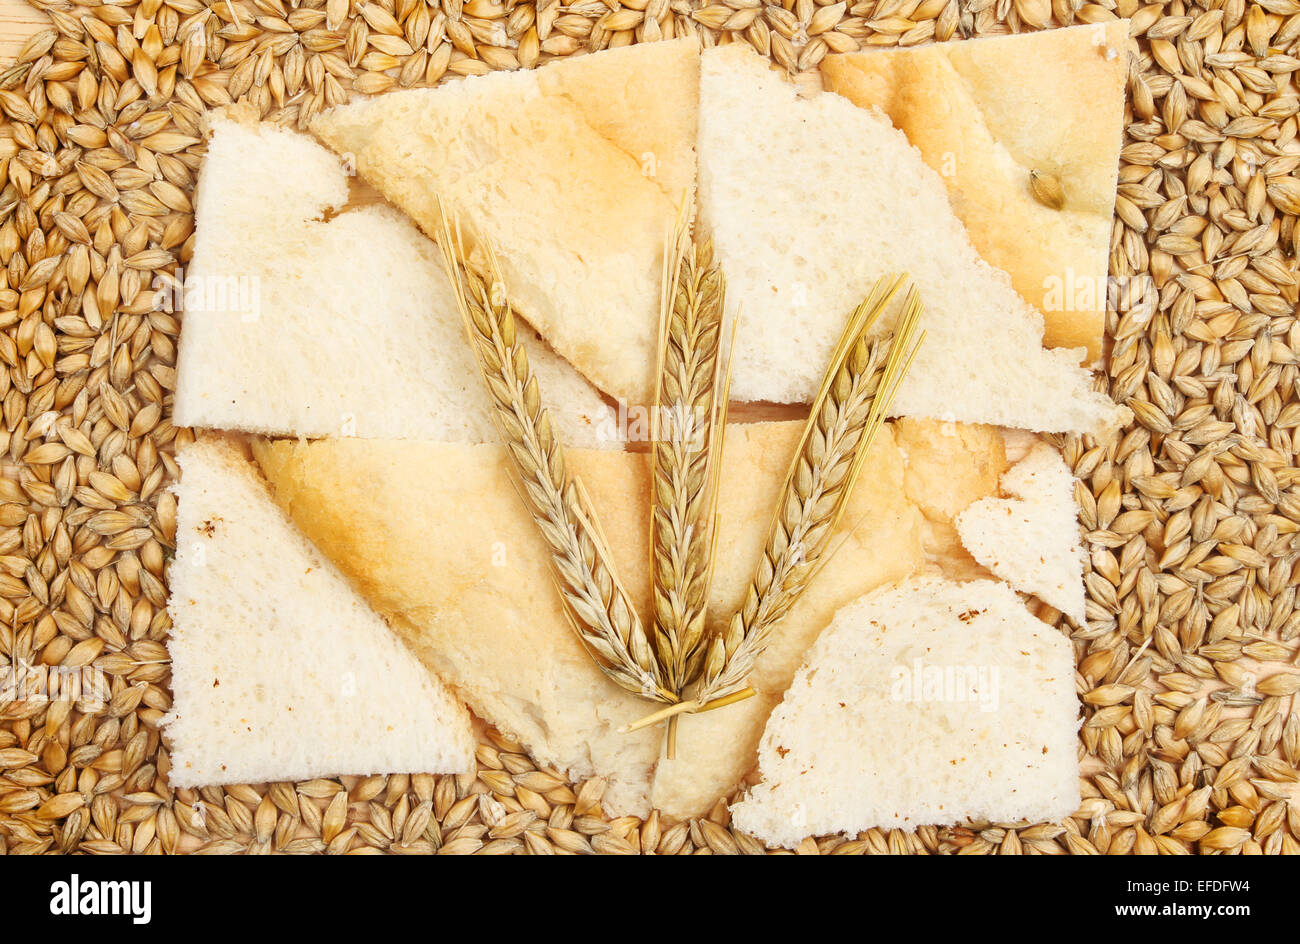 Barley ears on bread surrounded by wheat grains Stock Photo